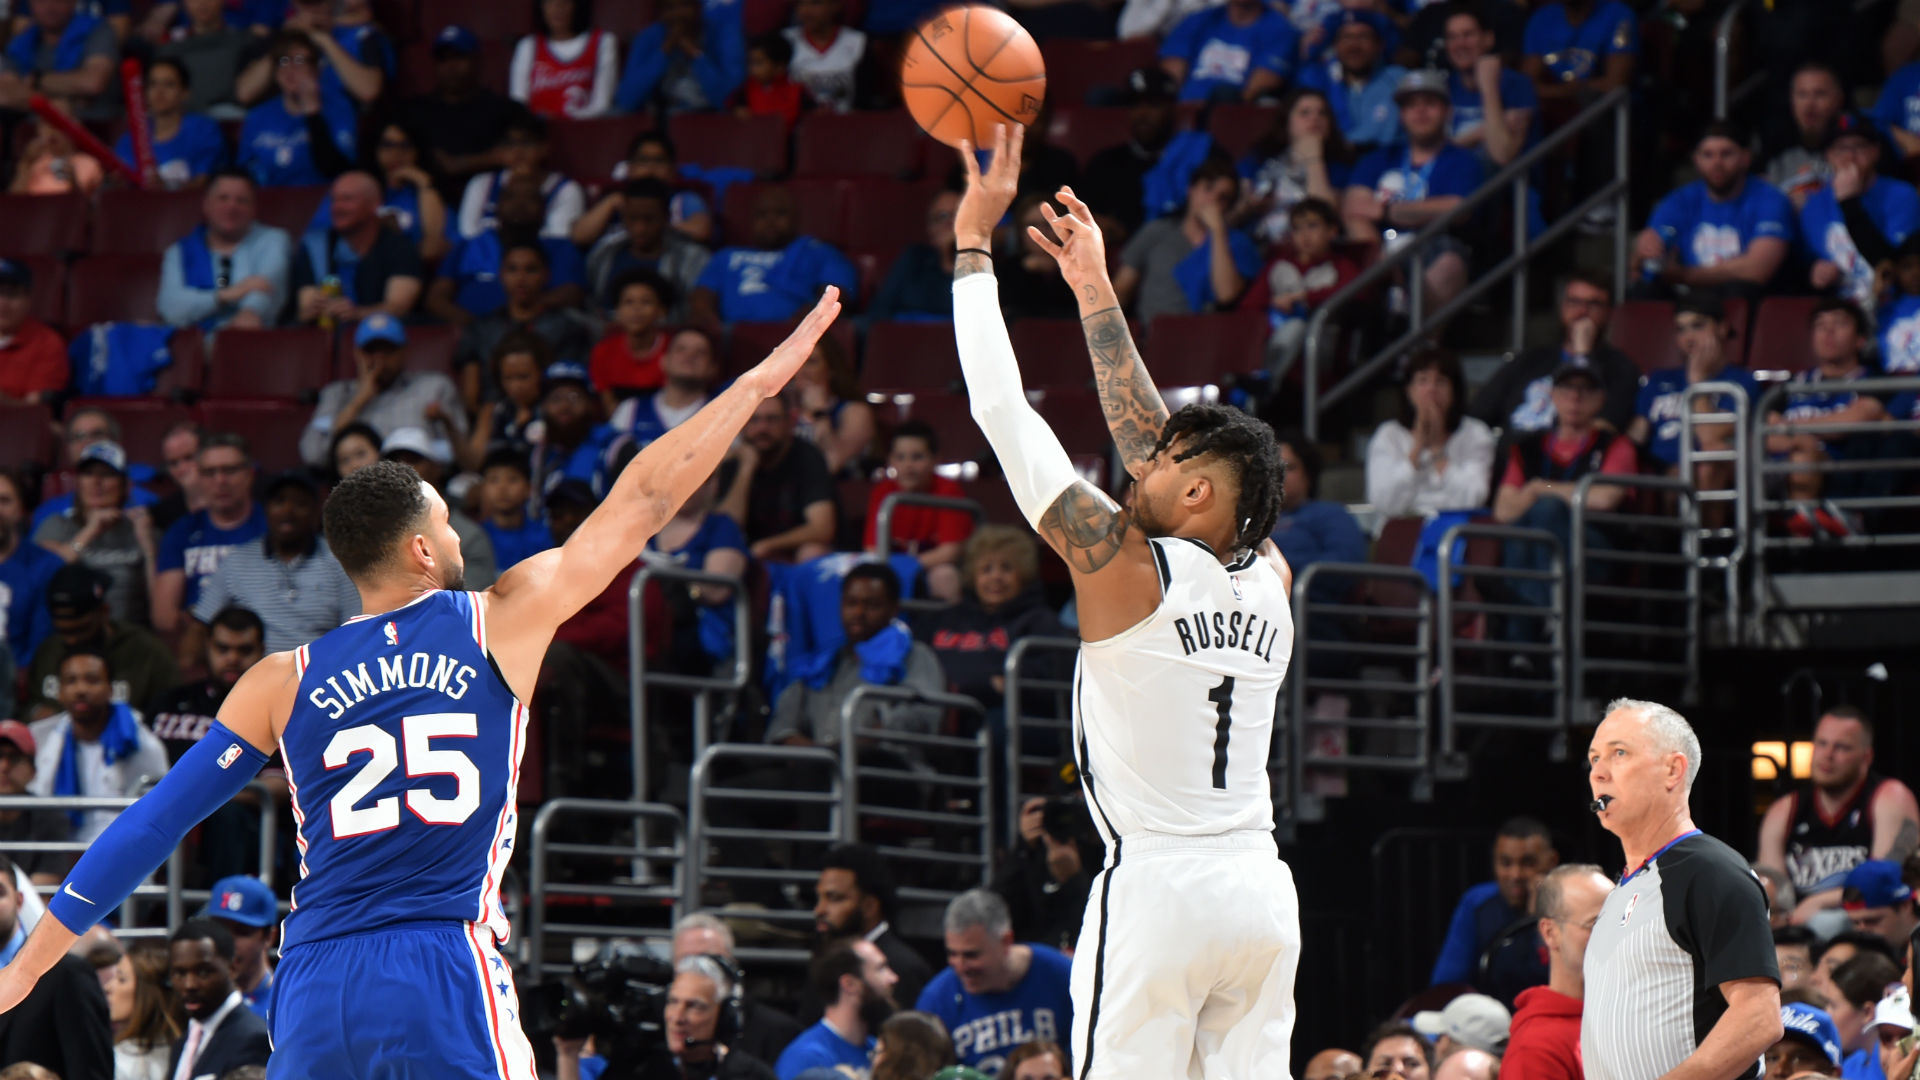 NBA Playoffs 2019: Scores and highlights from Nets vs. Sixers, Clippers vs. Warriors ...1920 x 1080